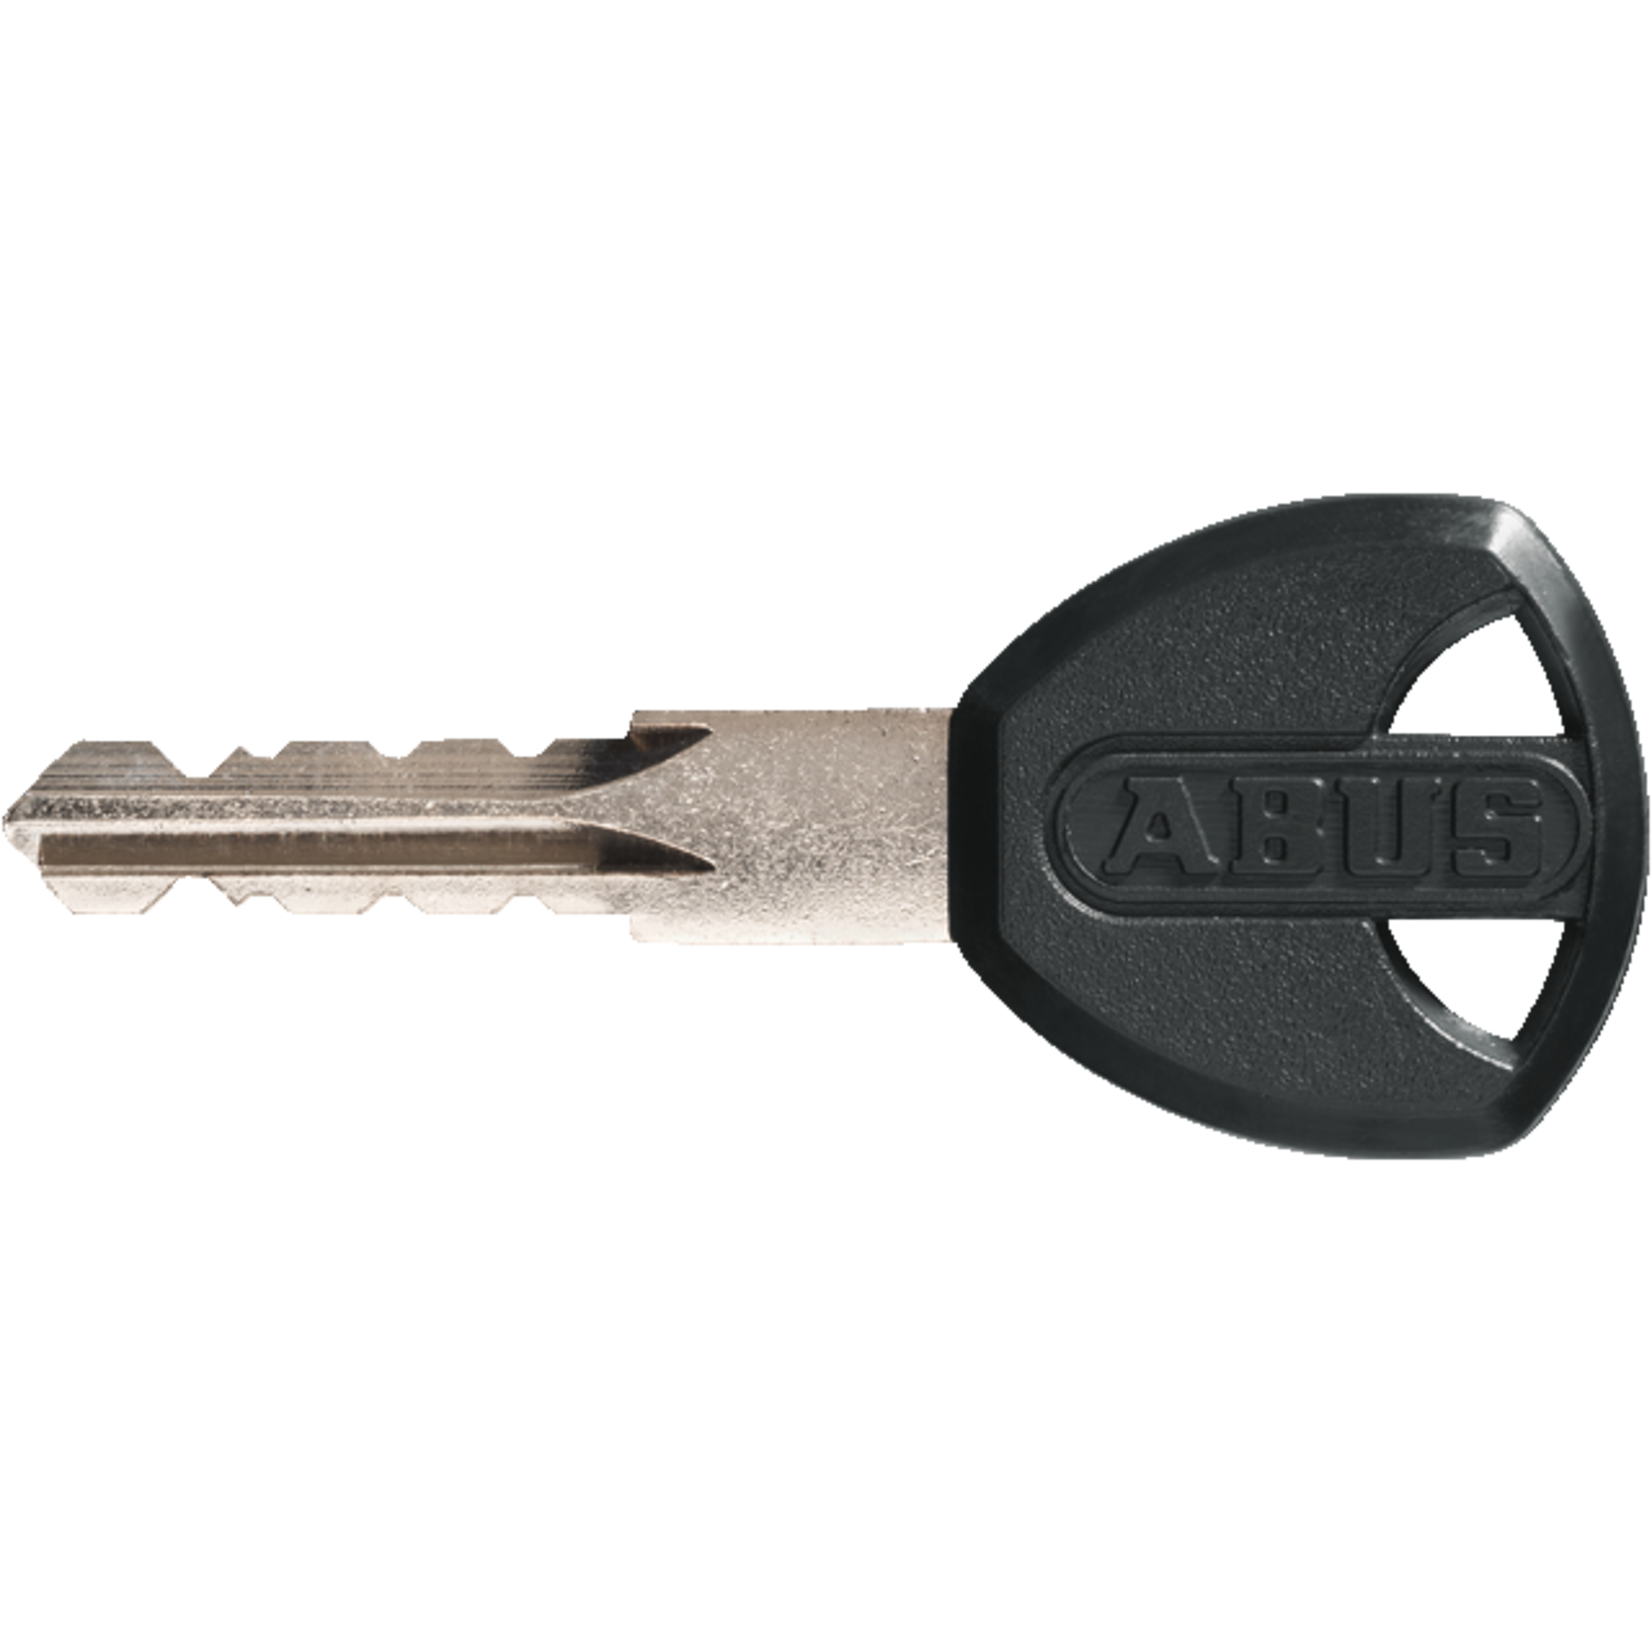 Abus ABUS CABLE LOCK BOOSTER 6512K BLACK - 180CM